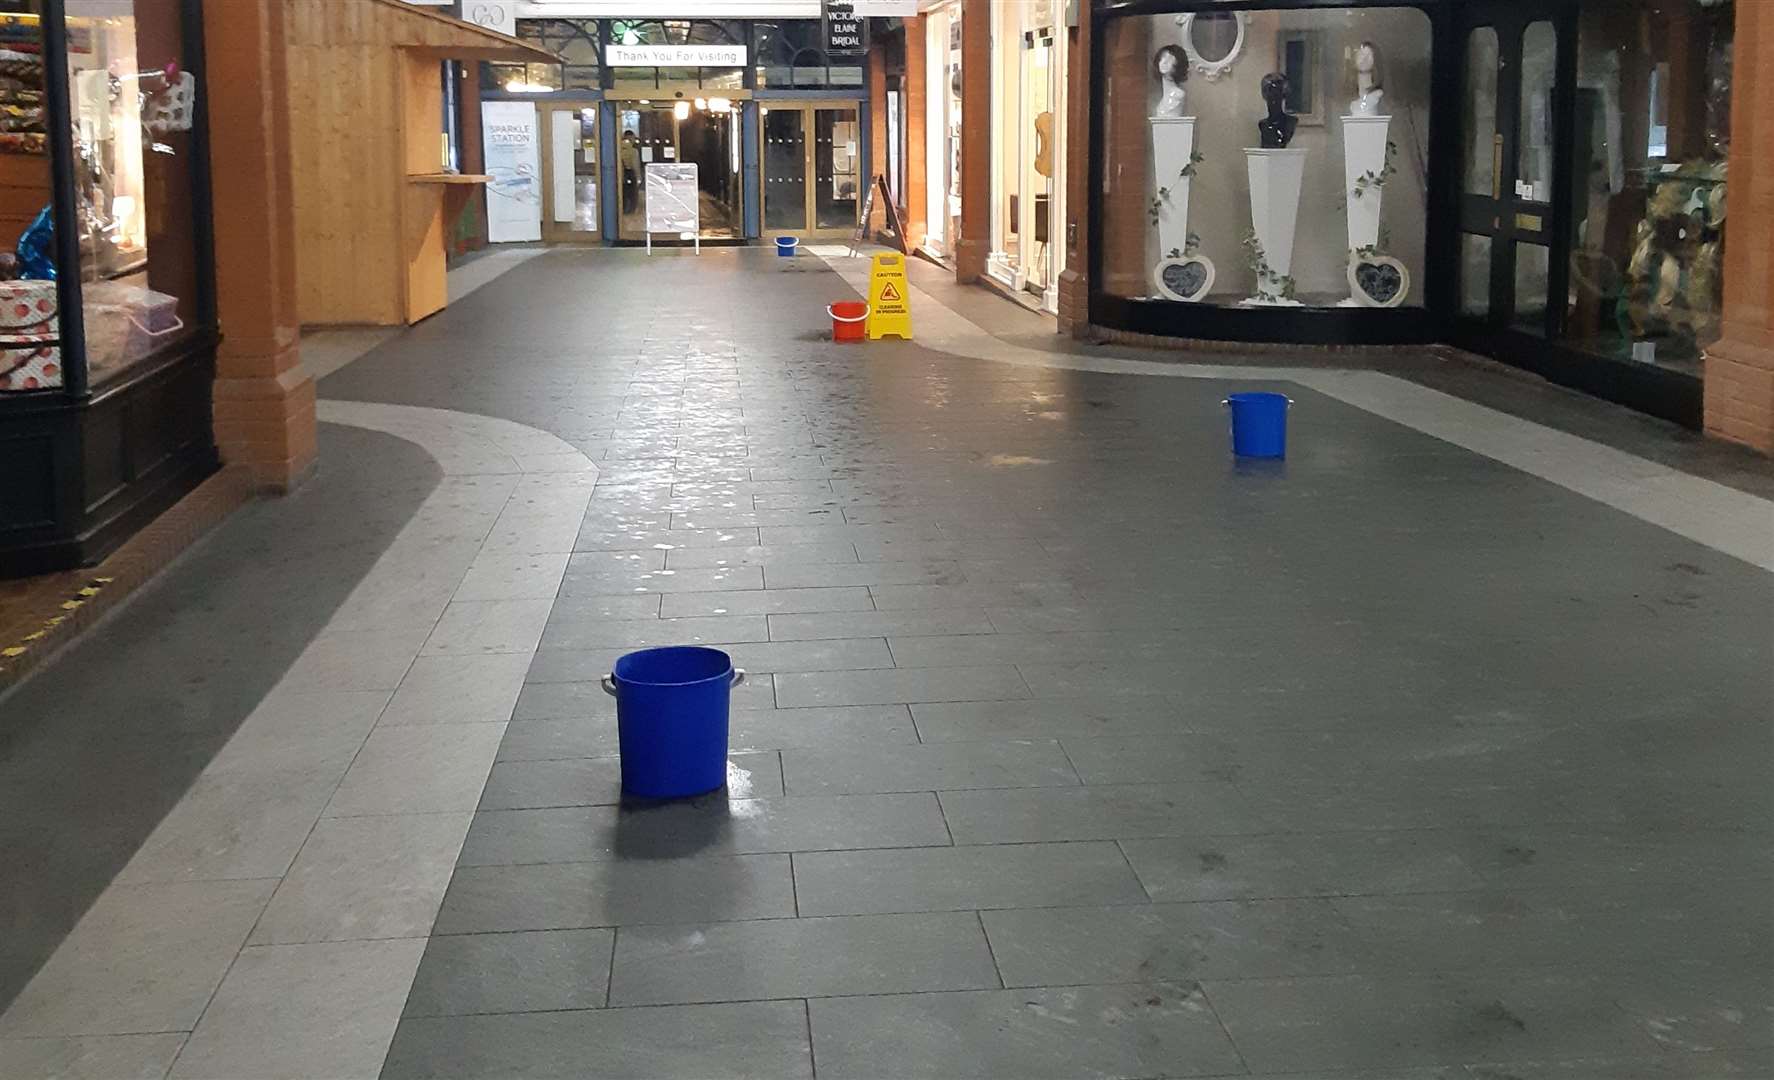 Buckets placed in the Royal Star Arcade to catch the water leaking through